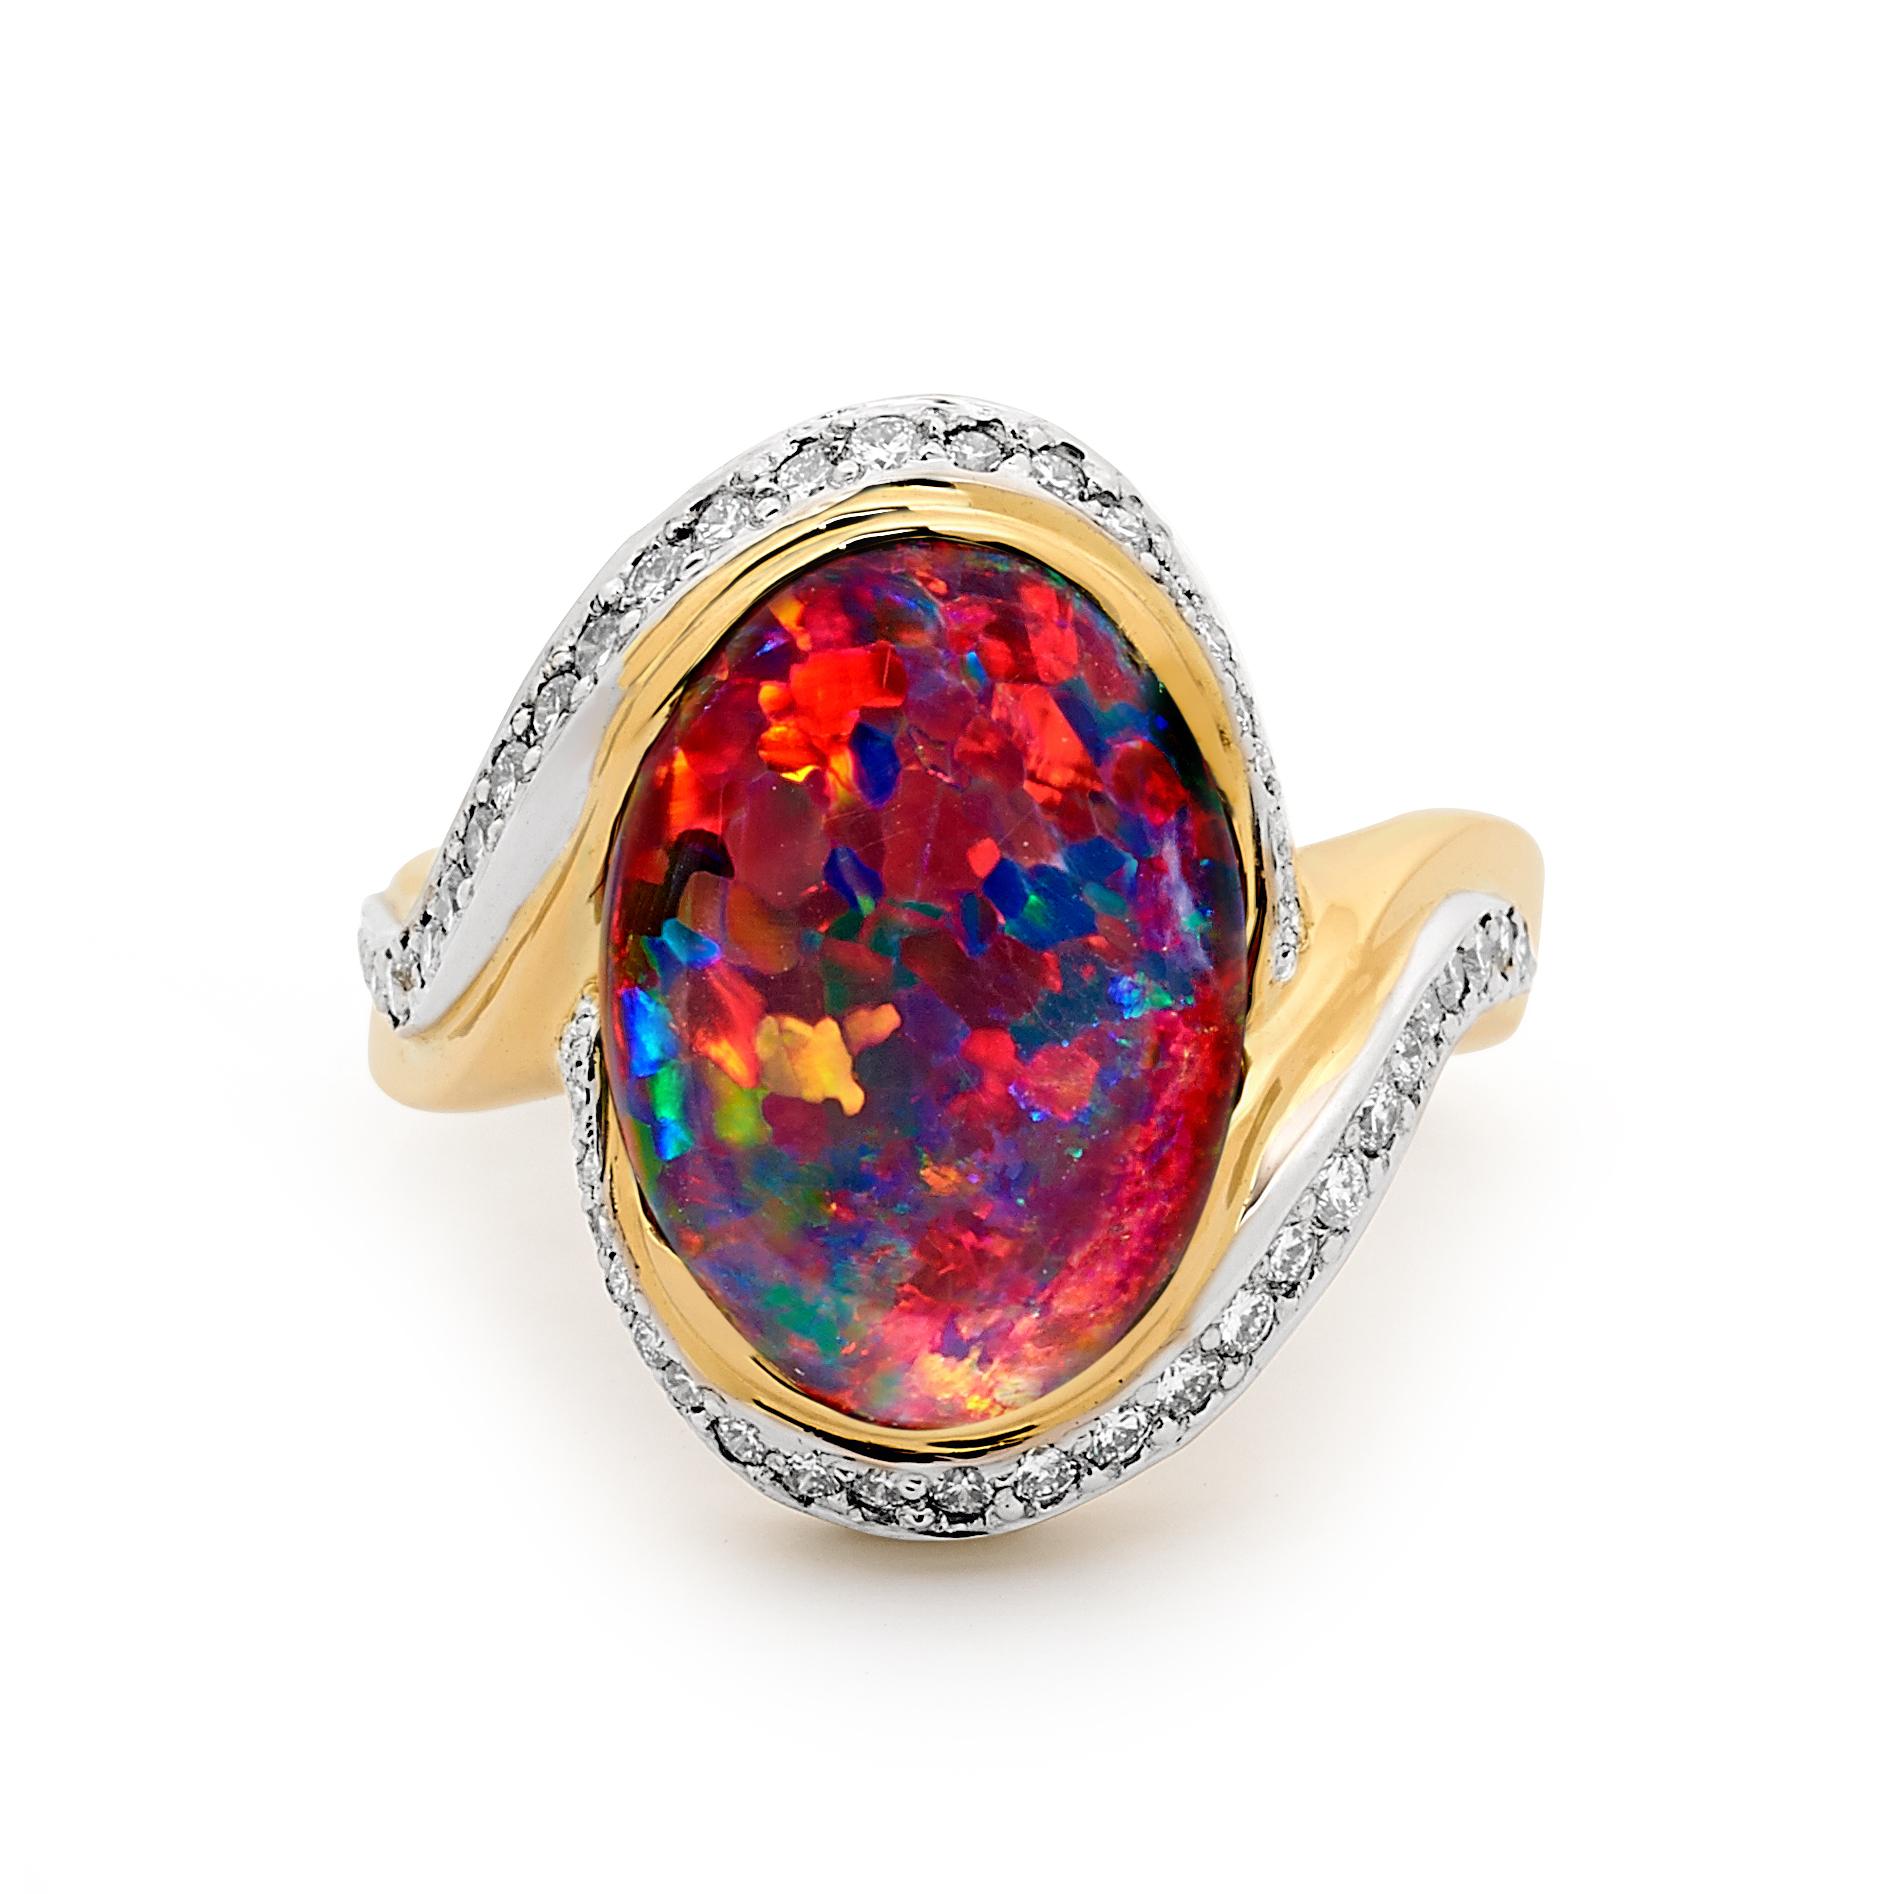 Contemporary Australian 5.48ct Black Opal and Diamond Cocktail Ring in 18K Gold